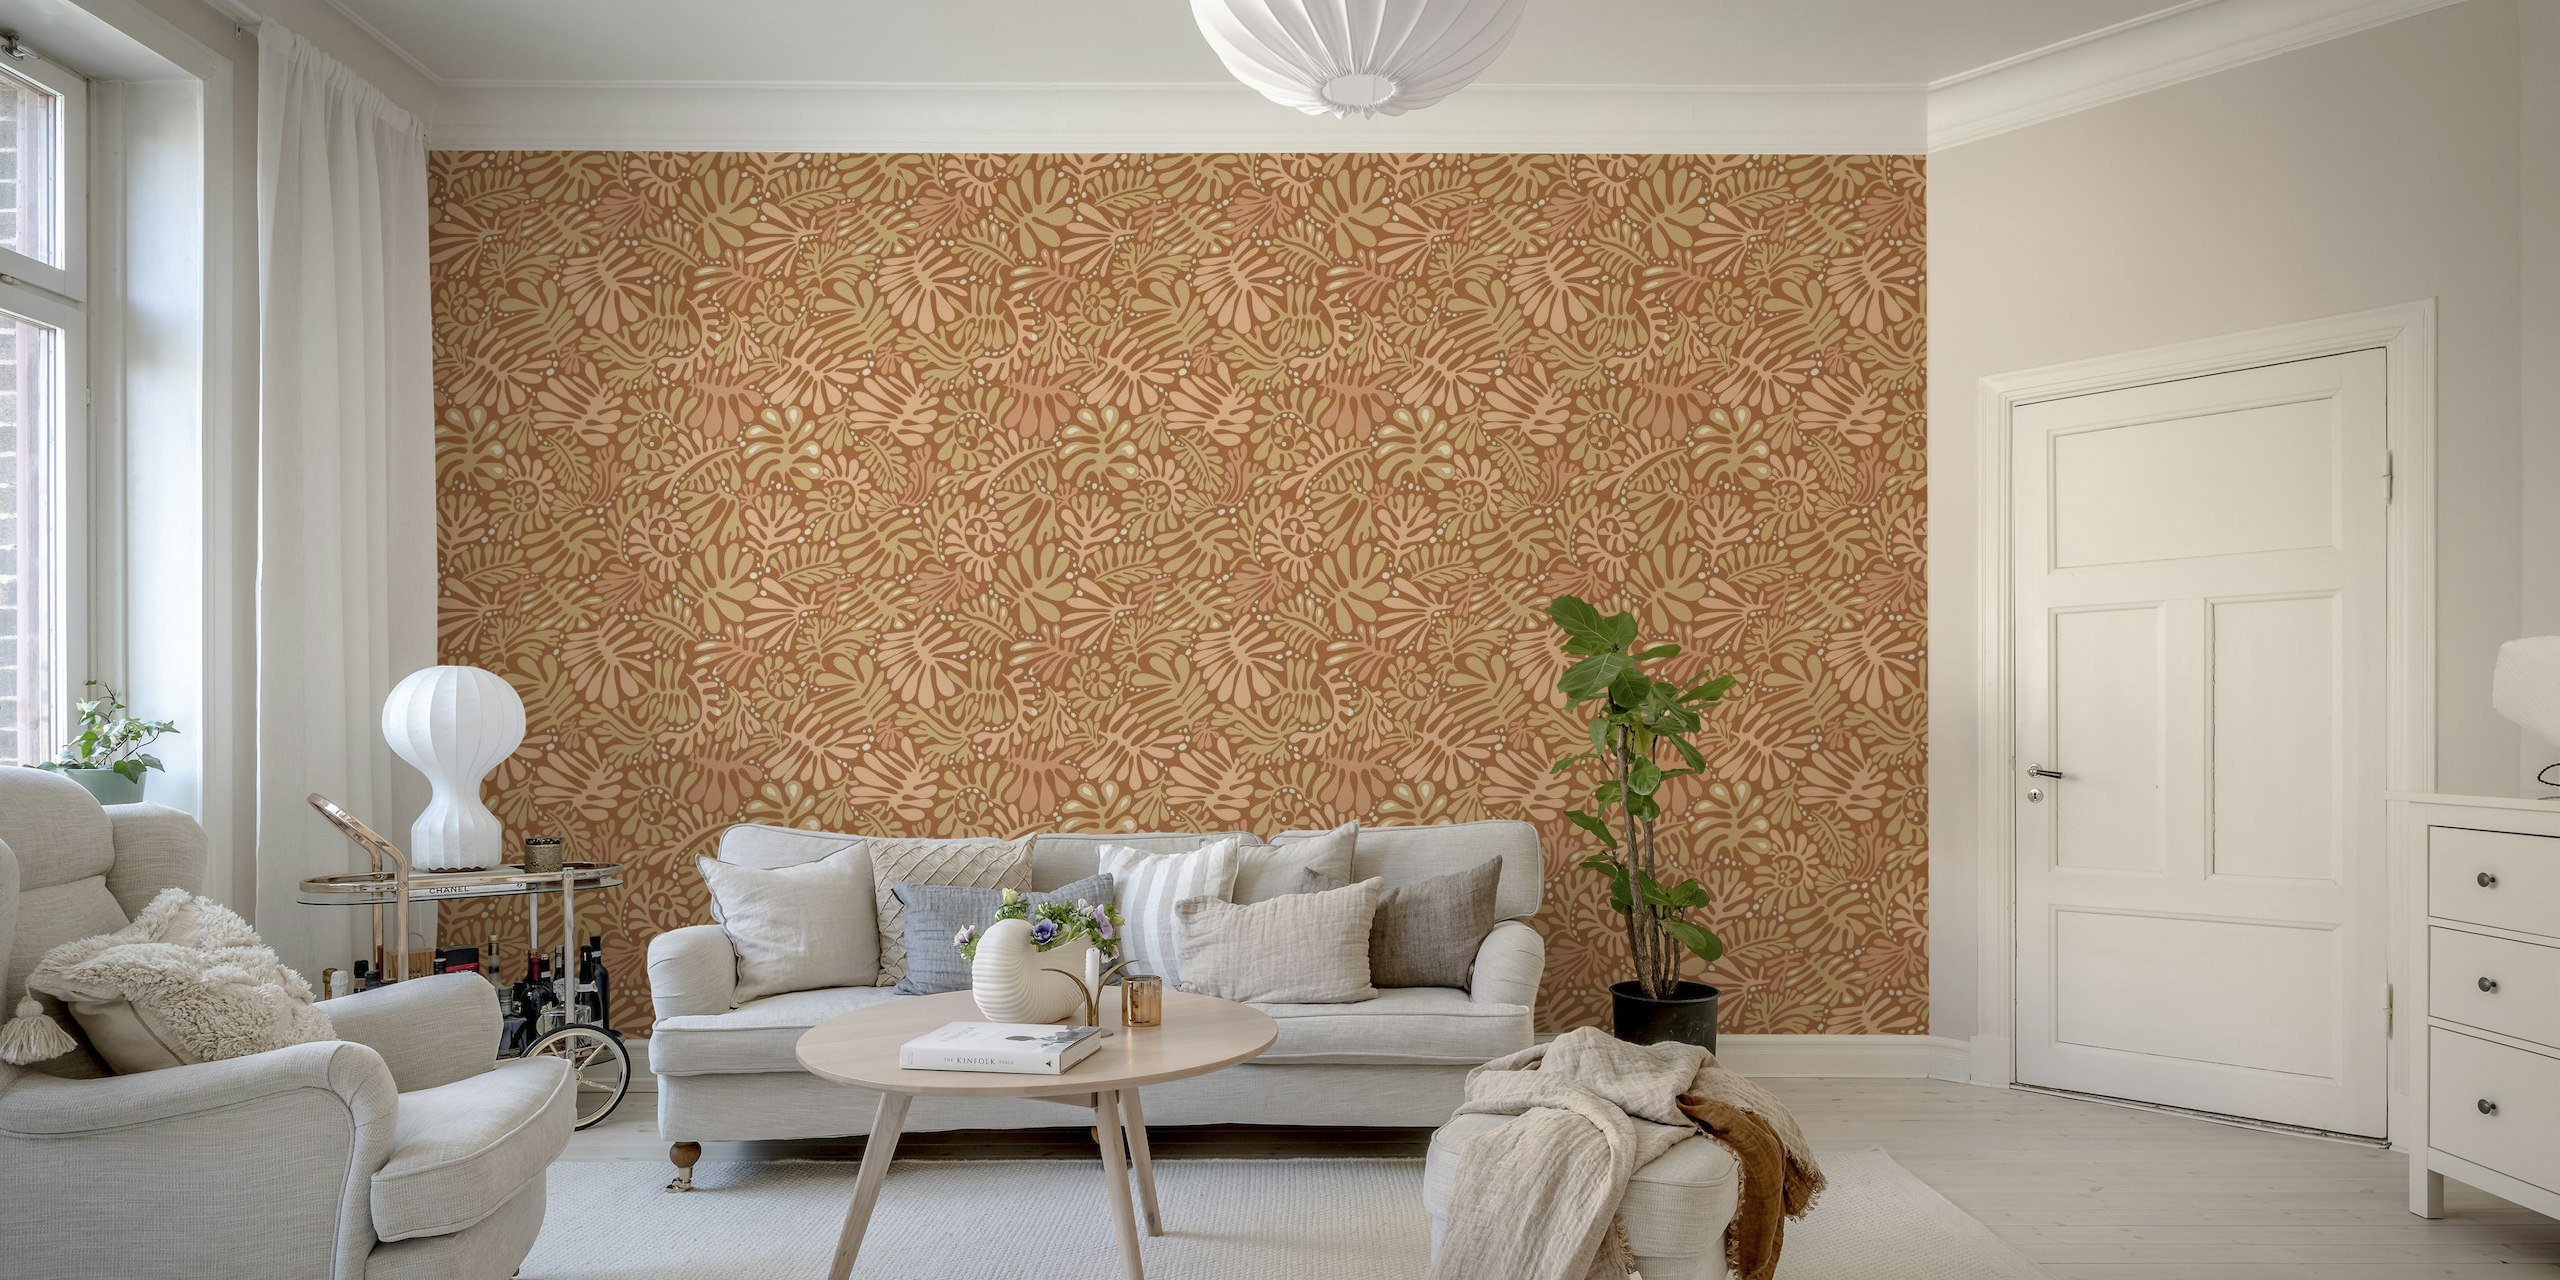 Rusty terracotta leaves pattern wall mural, subtle earth tones for natural decor